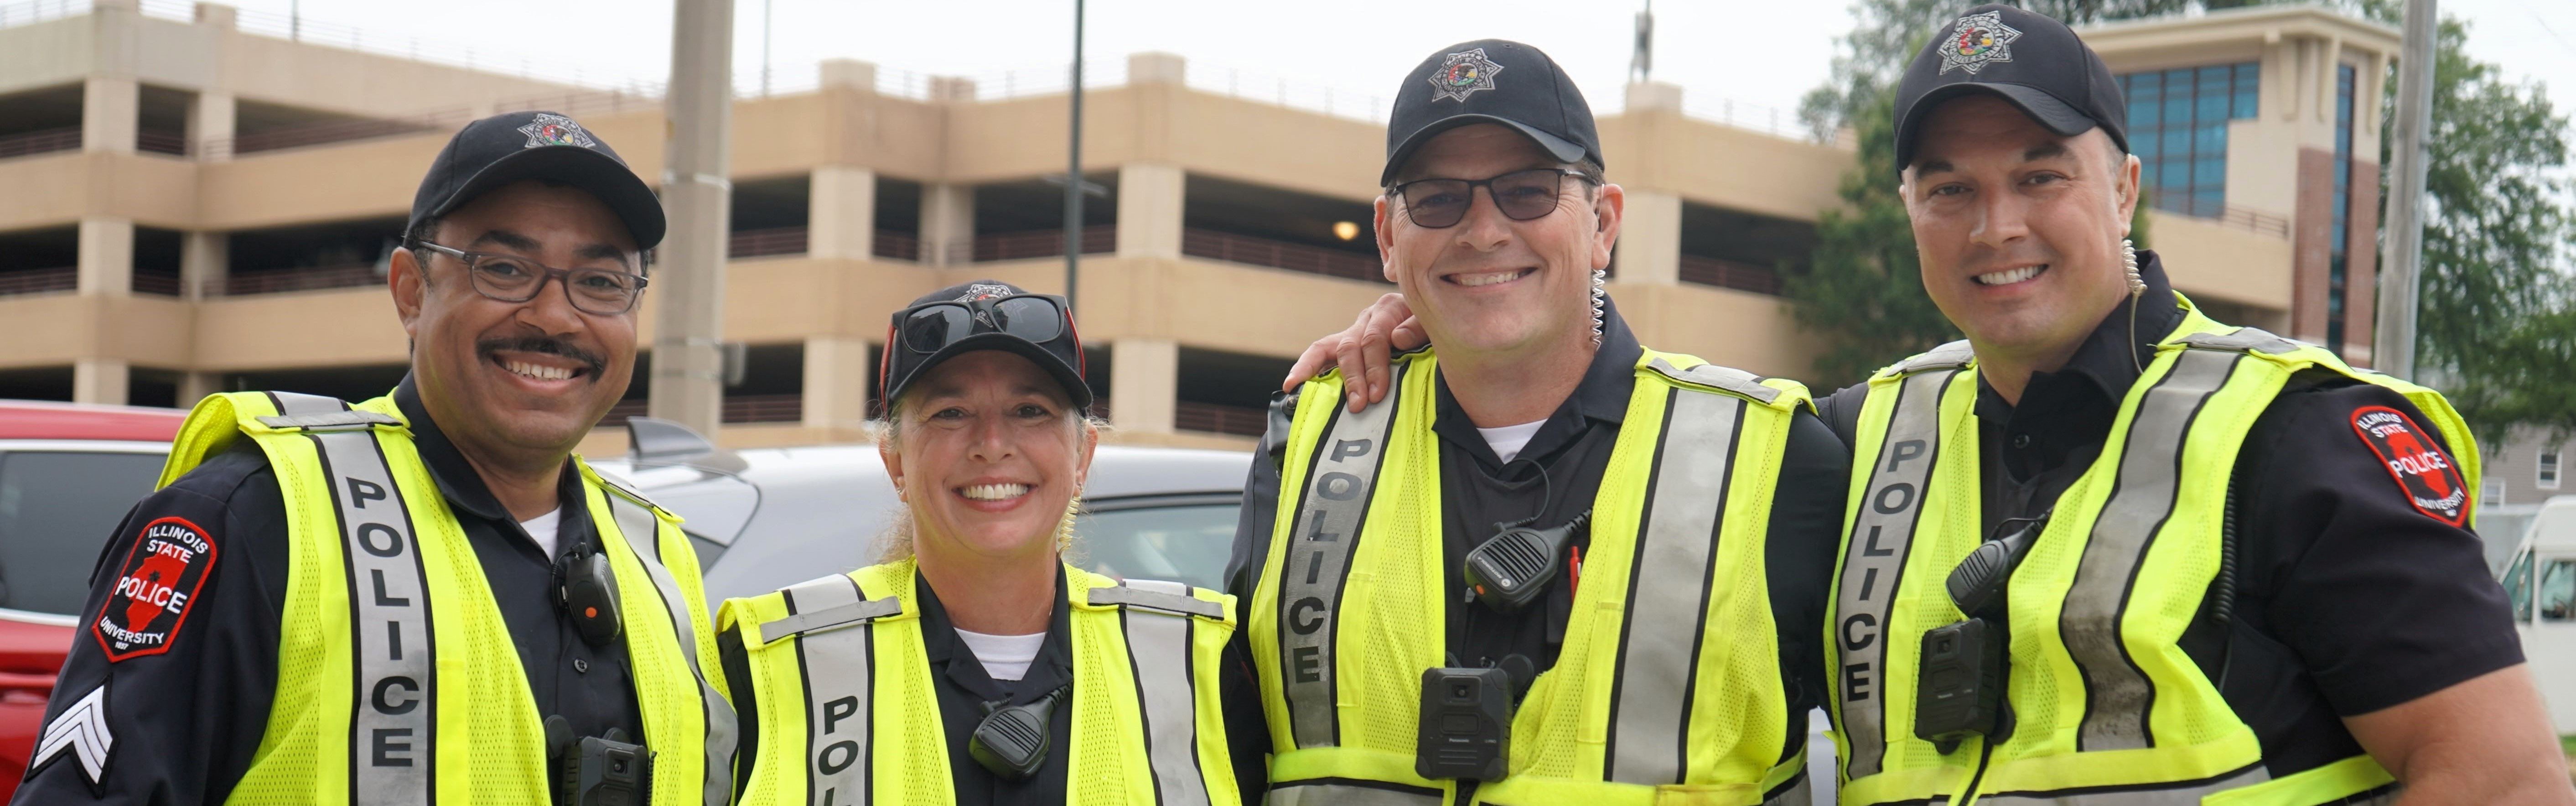 A group of police officers pose together during Move-In.